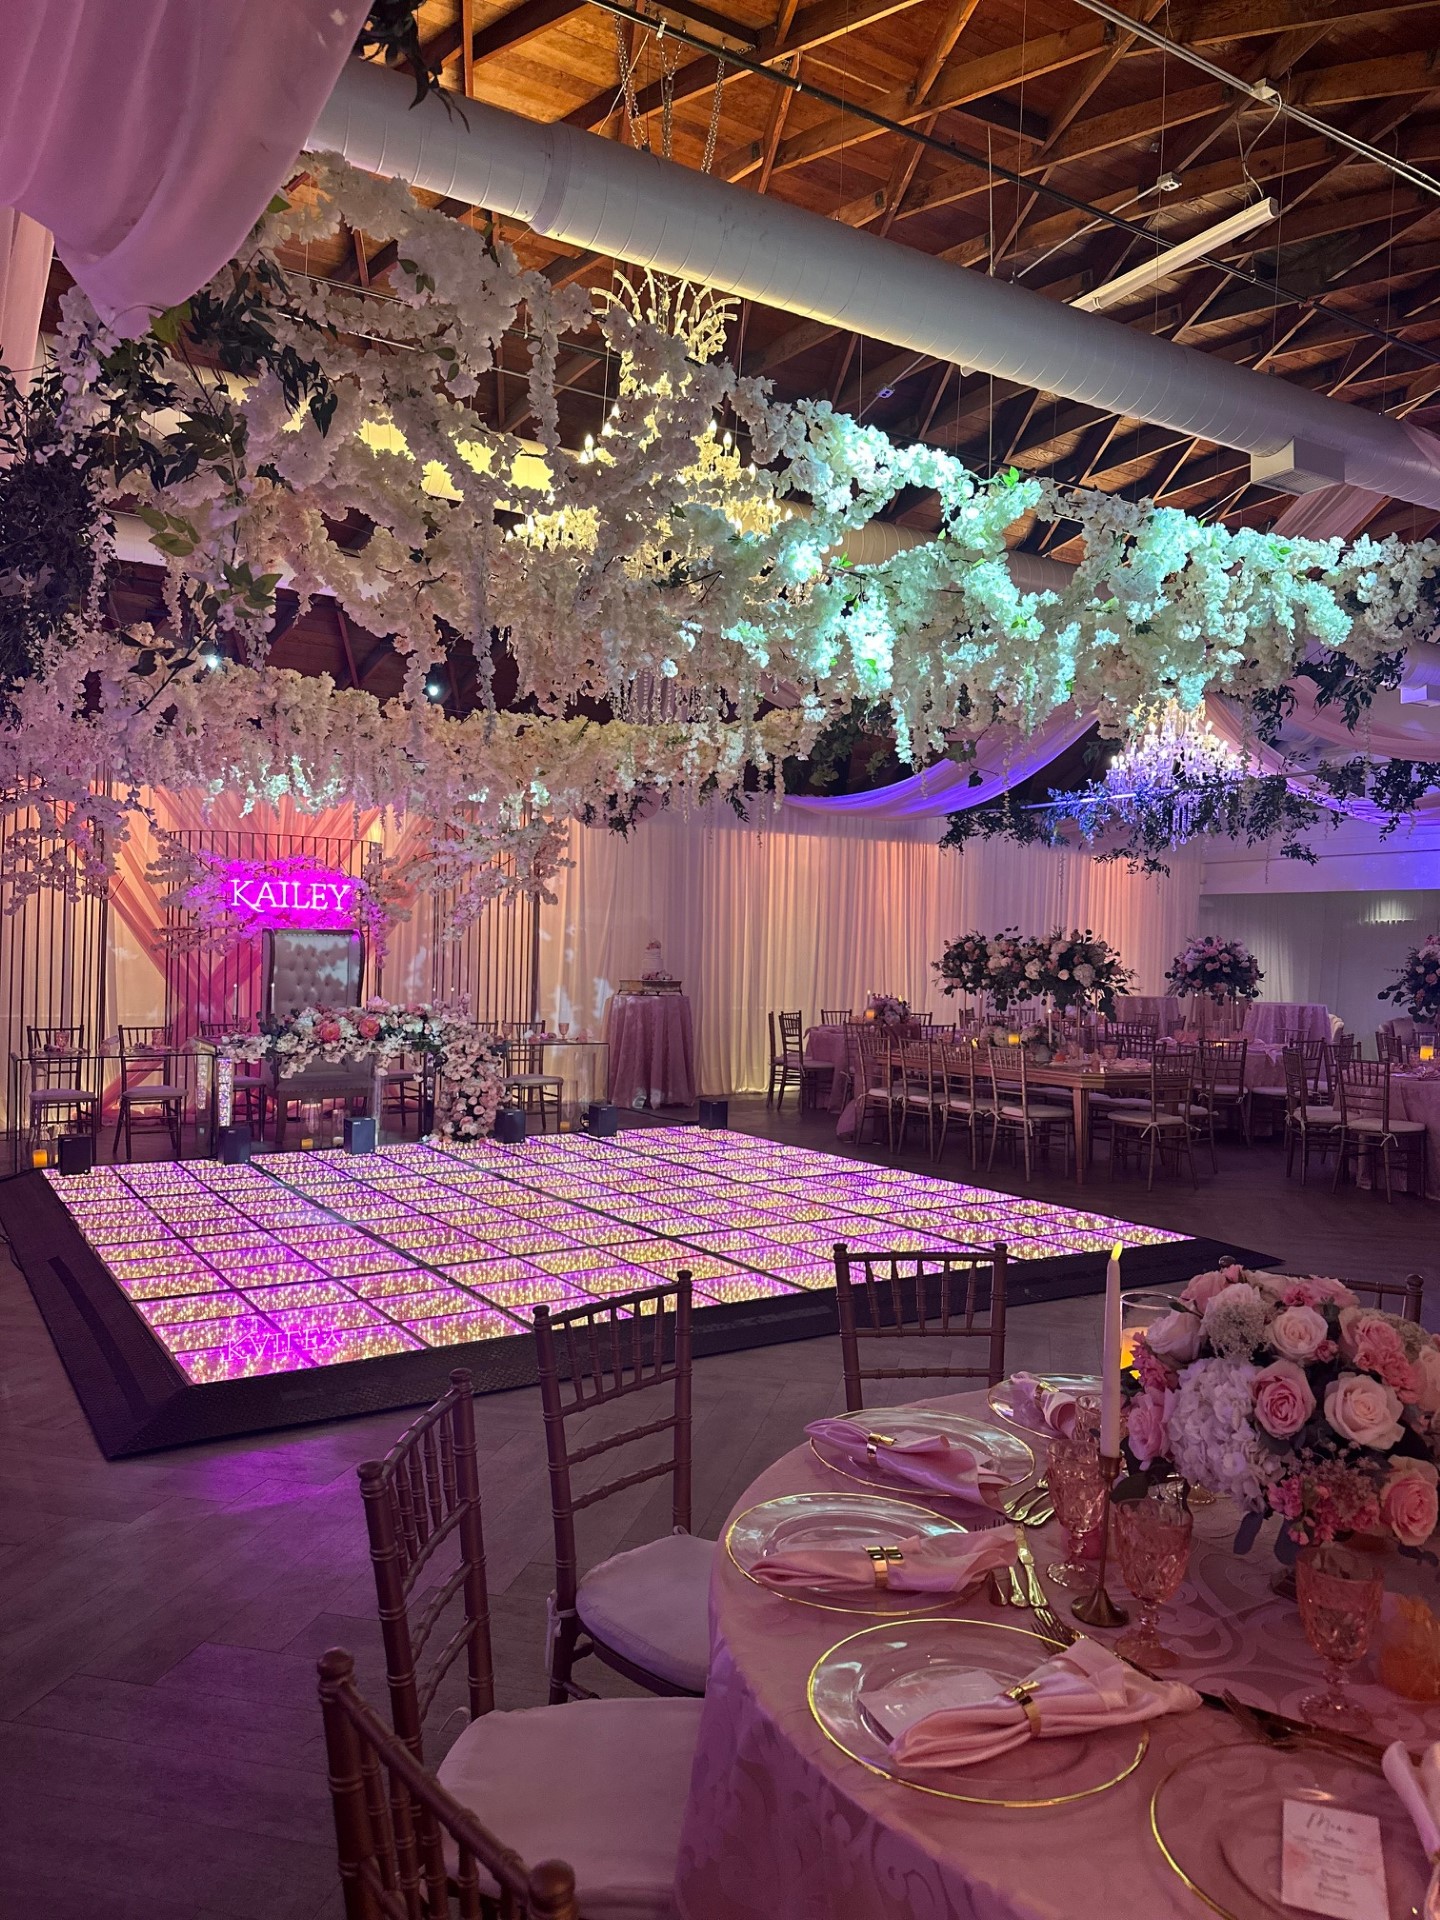 A Quinceanera reception in a function hall with a floral design and a dance floor